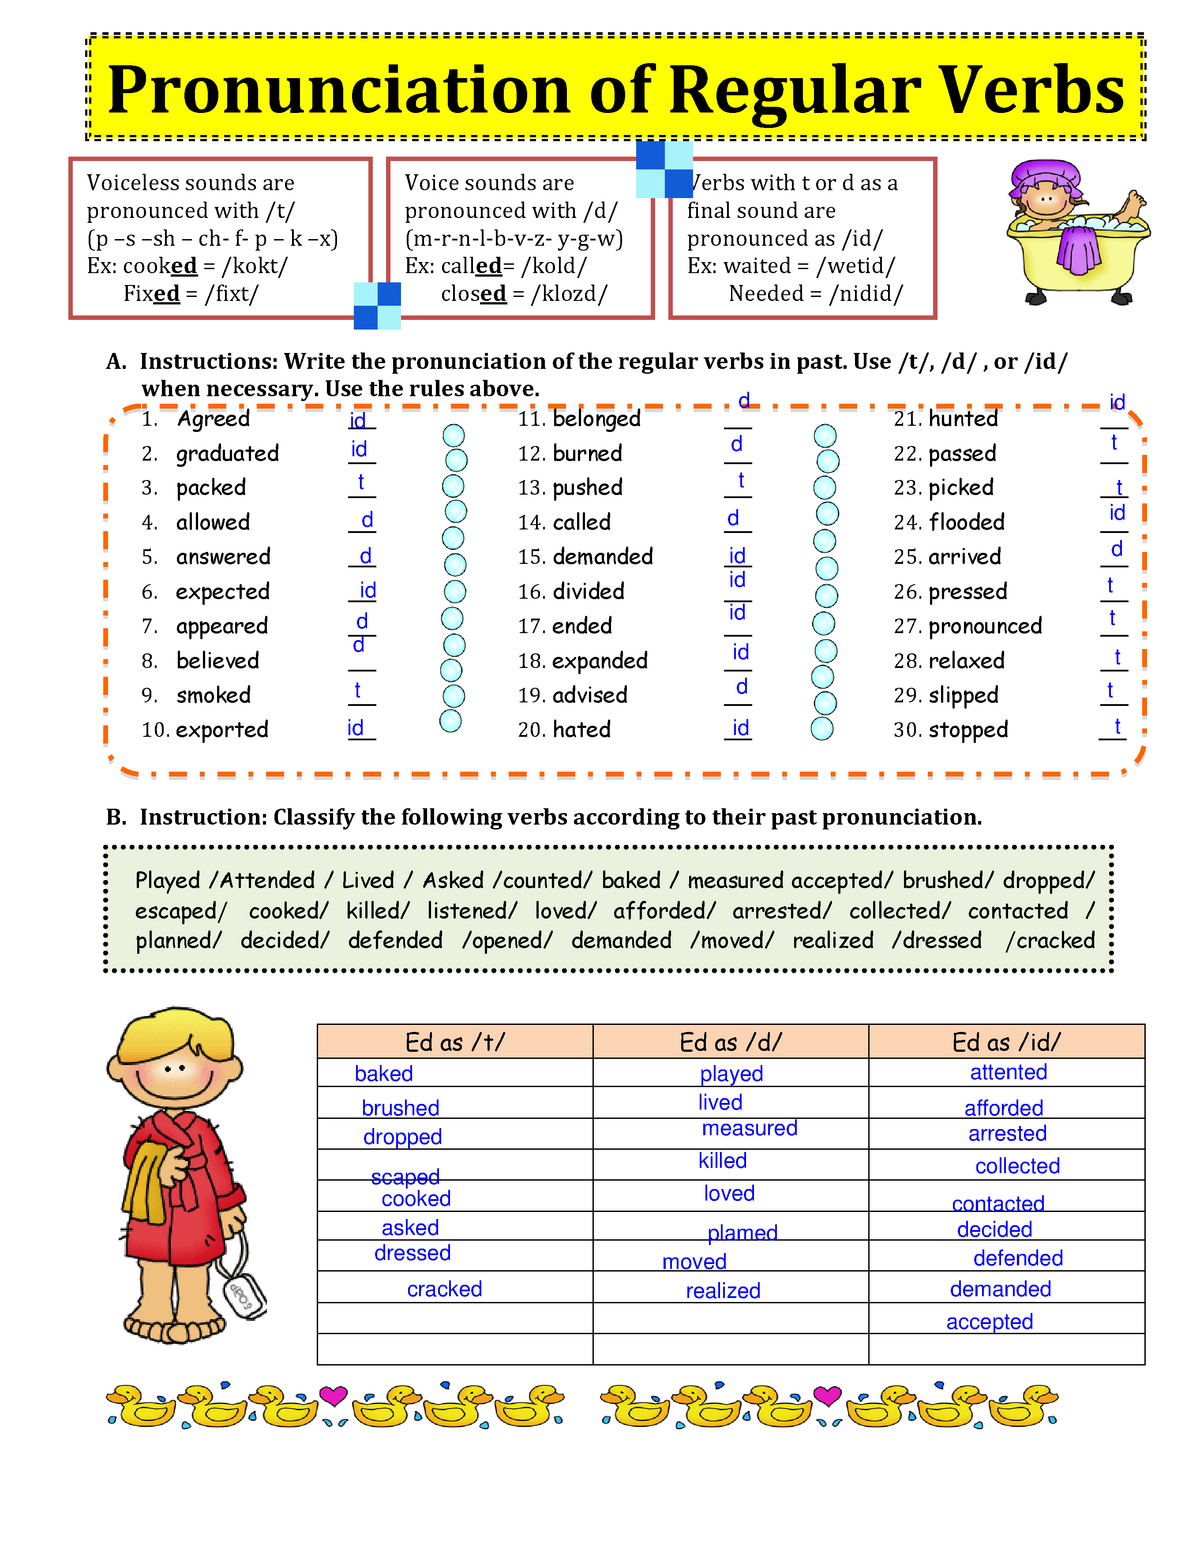 pronunciation-of-regular-verbs-in-the-simple-past-a-instructions-write-the-pronunciation-of